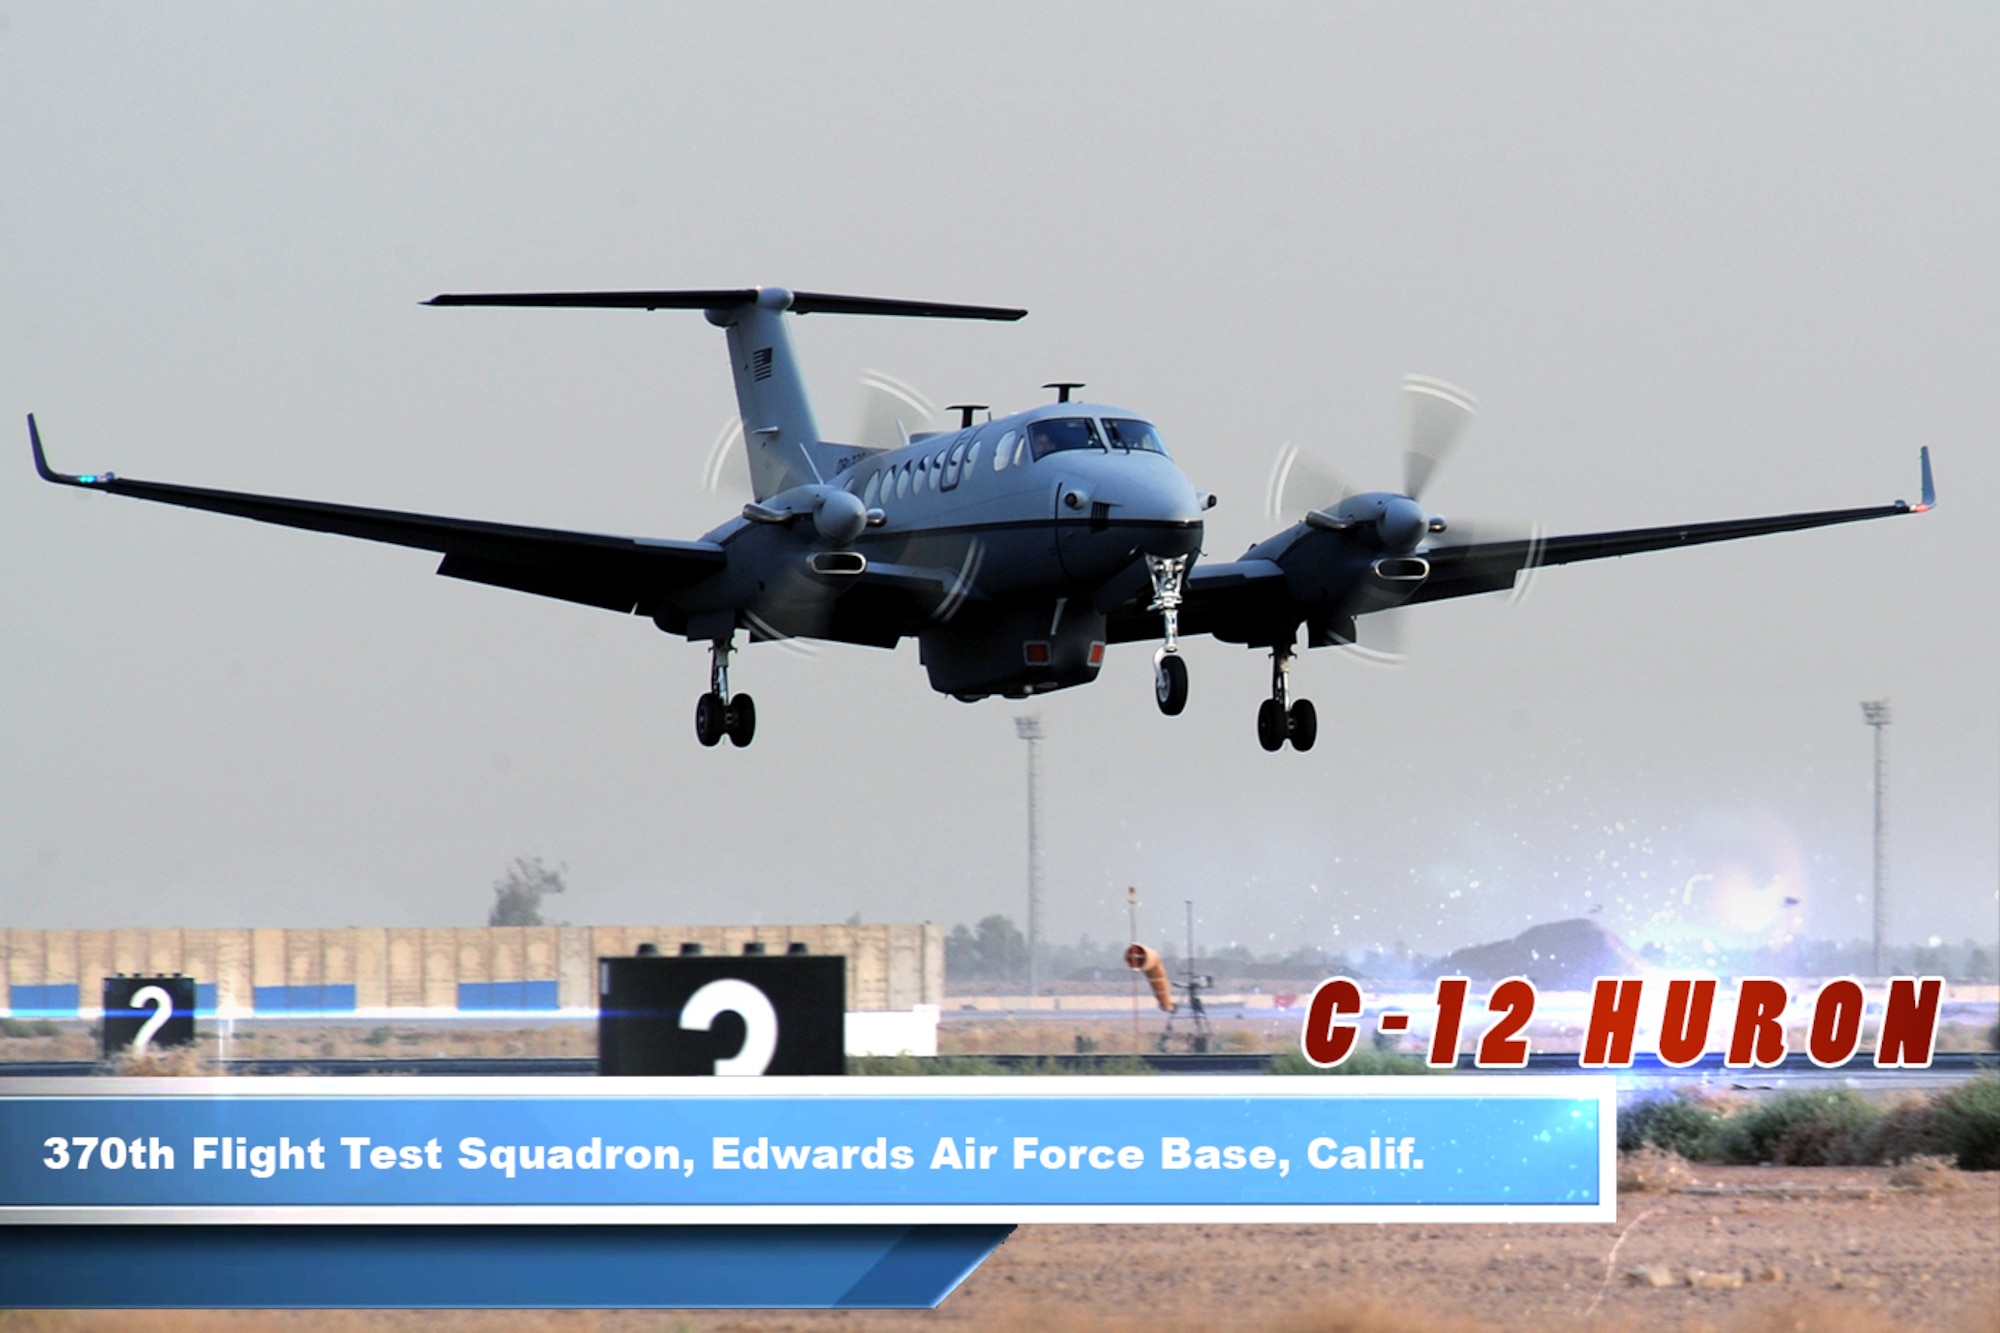 The MC-12W is a medium- to low-altitude, twin-engine turboprop aircraft. The primary mission is providing intelligence, surveillance and reconnaissance (ISR) support directly to ground forces. The MC-12W is a joint forces air component commander asset in support of the joint force commander.